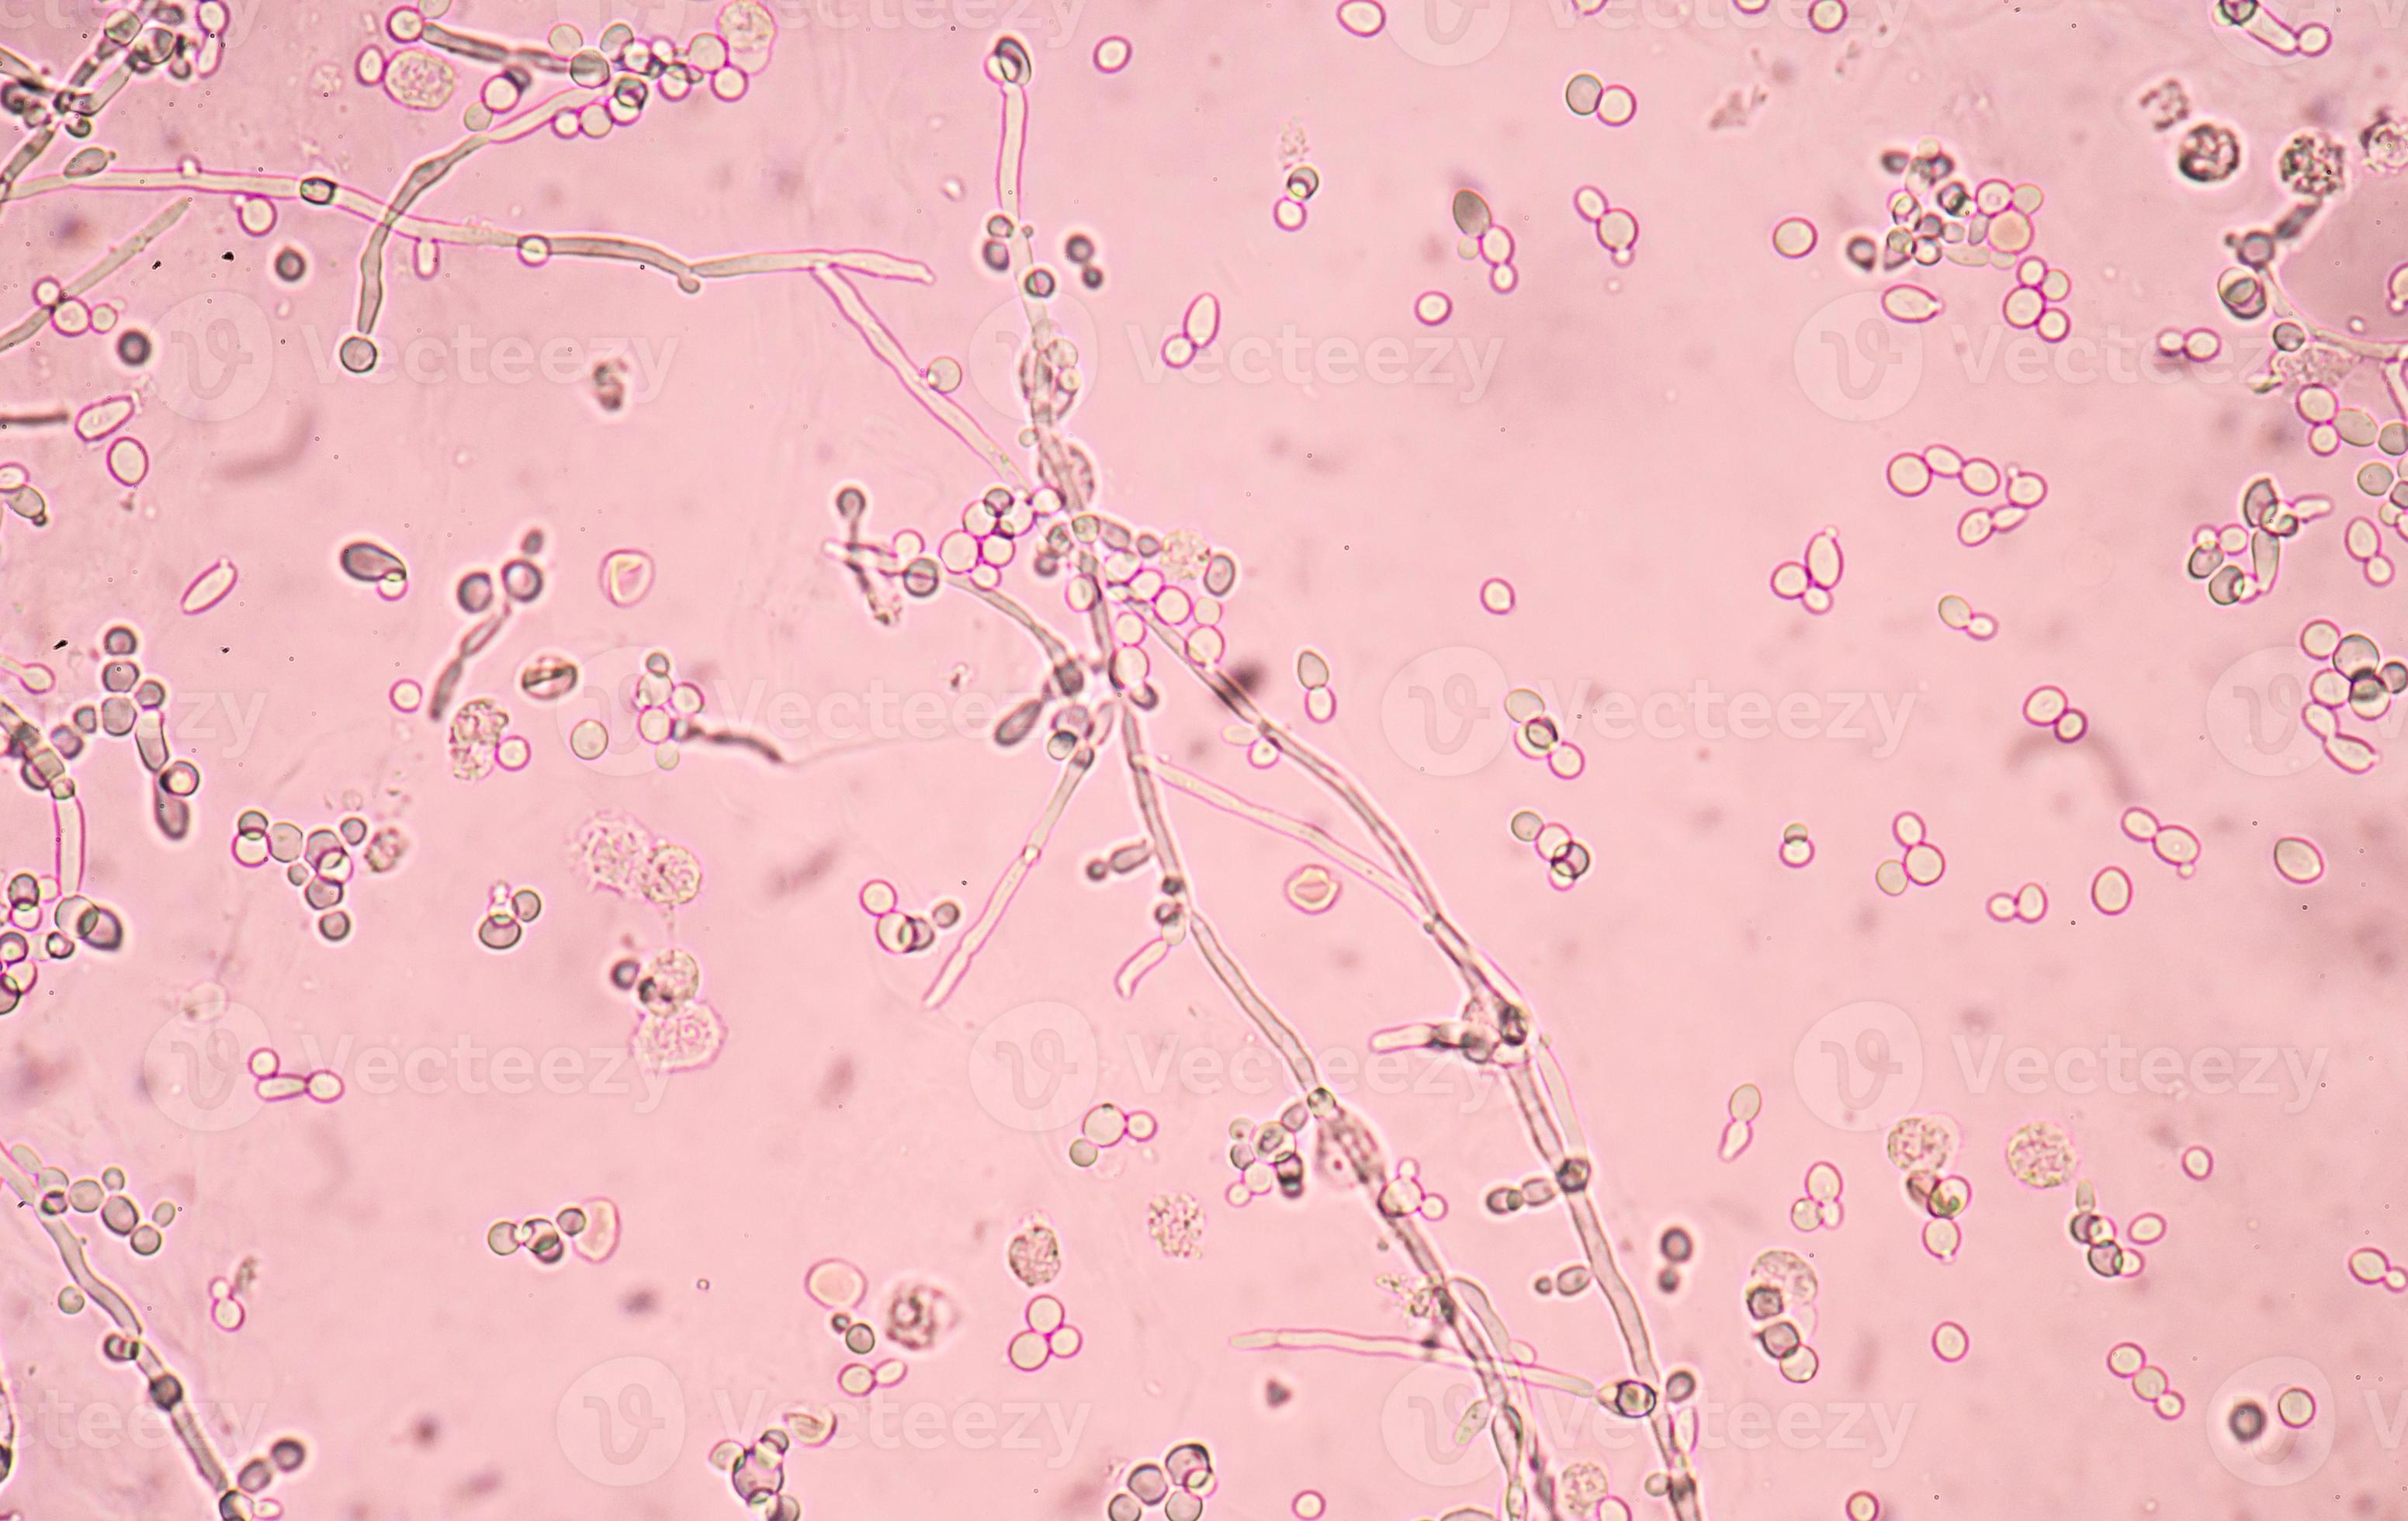 Budding Yeast Cells With Pseudohyphae Stock Photo At Vecteezy